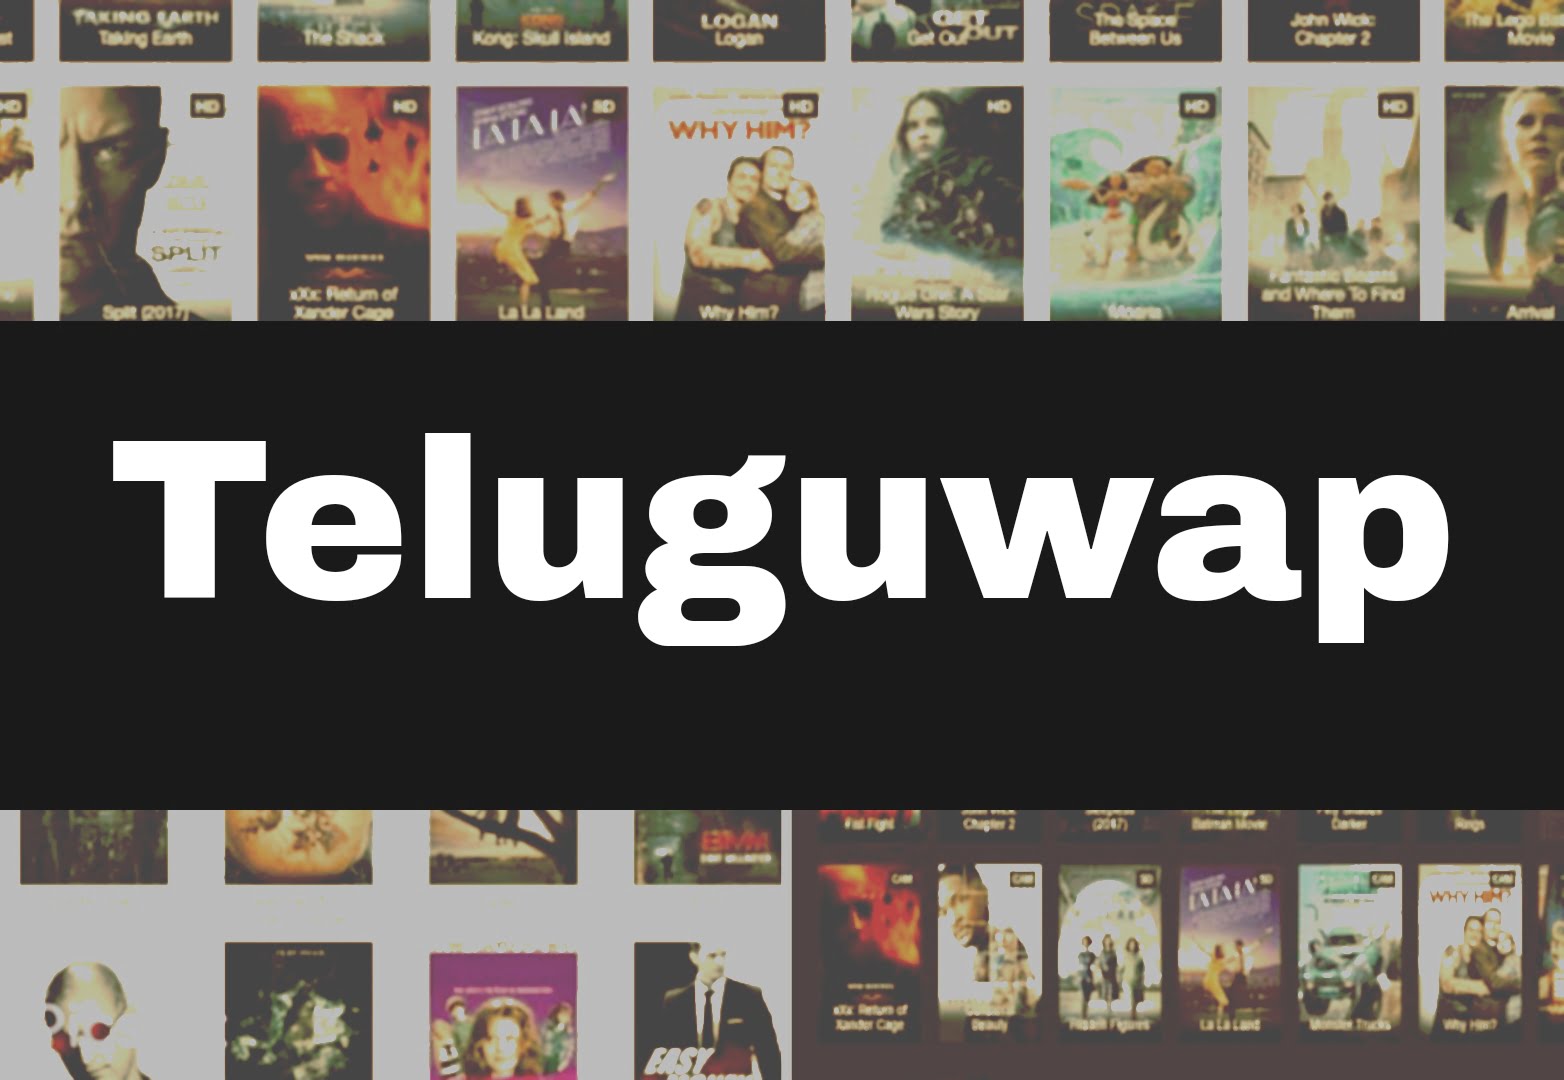 Teluguwap 2021 – Free Mp3 Songs and Movies Download Telugu Wap New Mp4 Songs Download Teluguwap Illegal Website